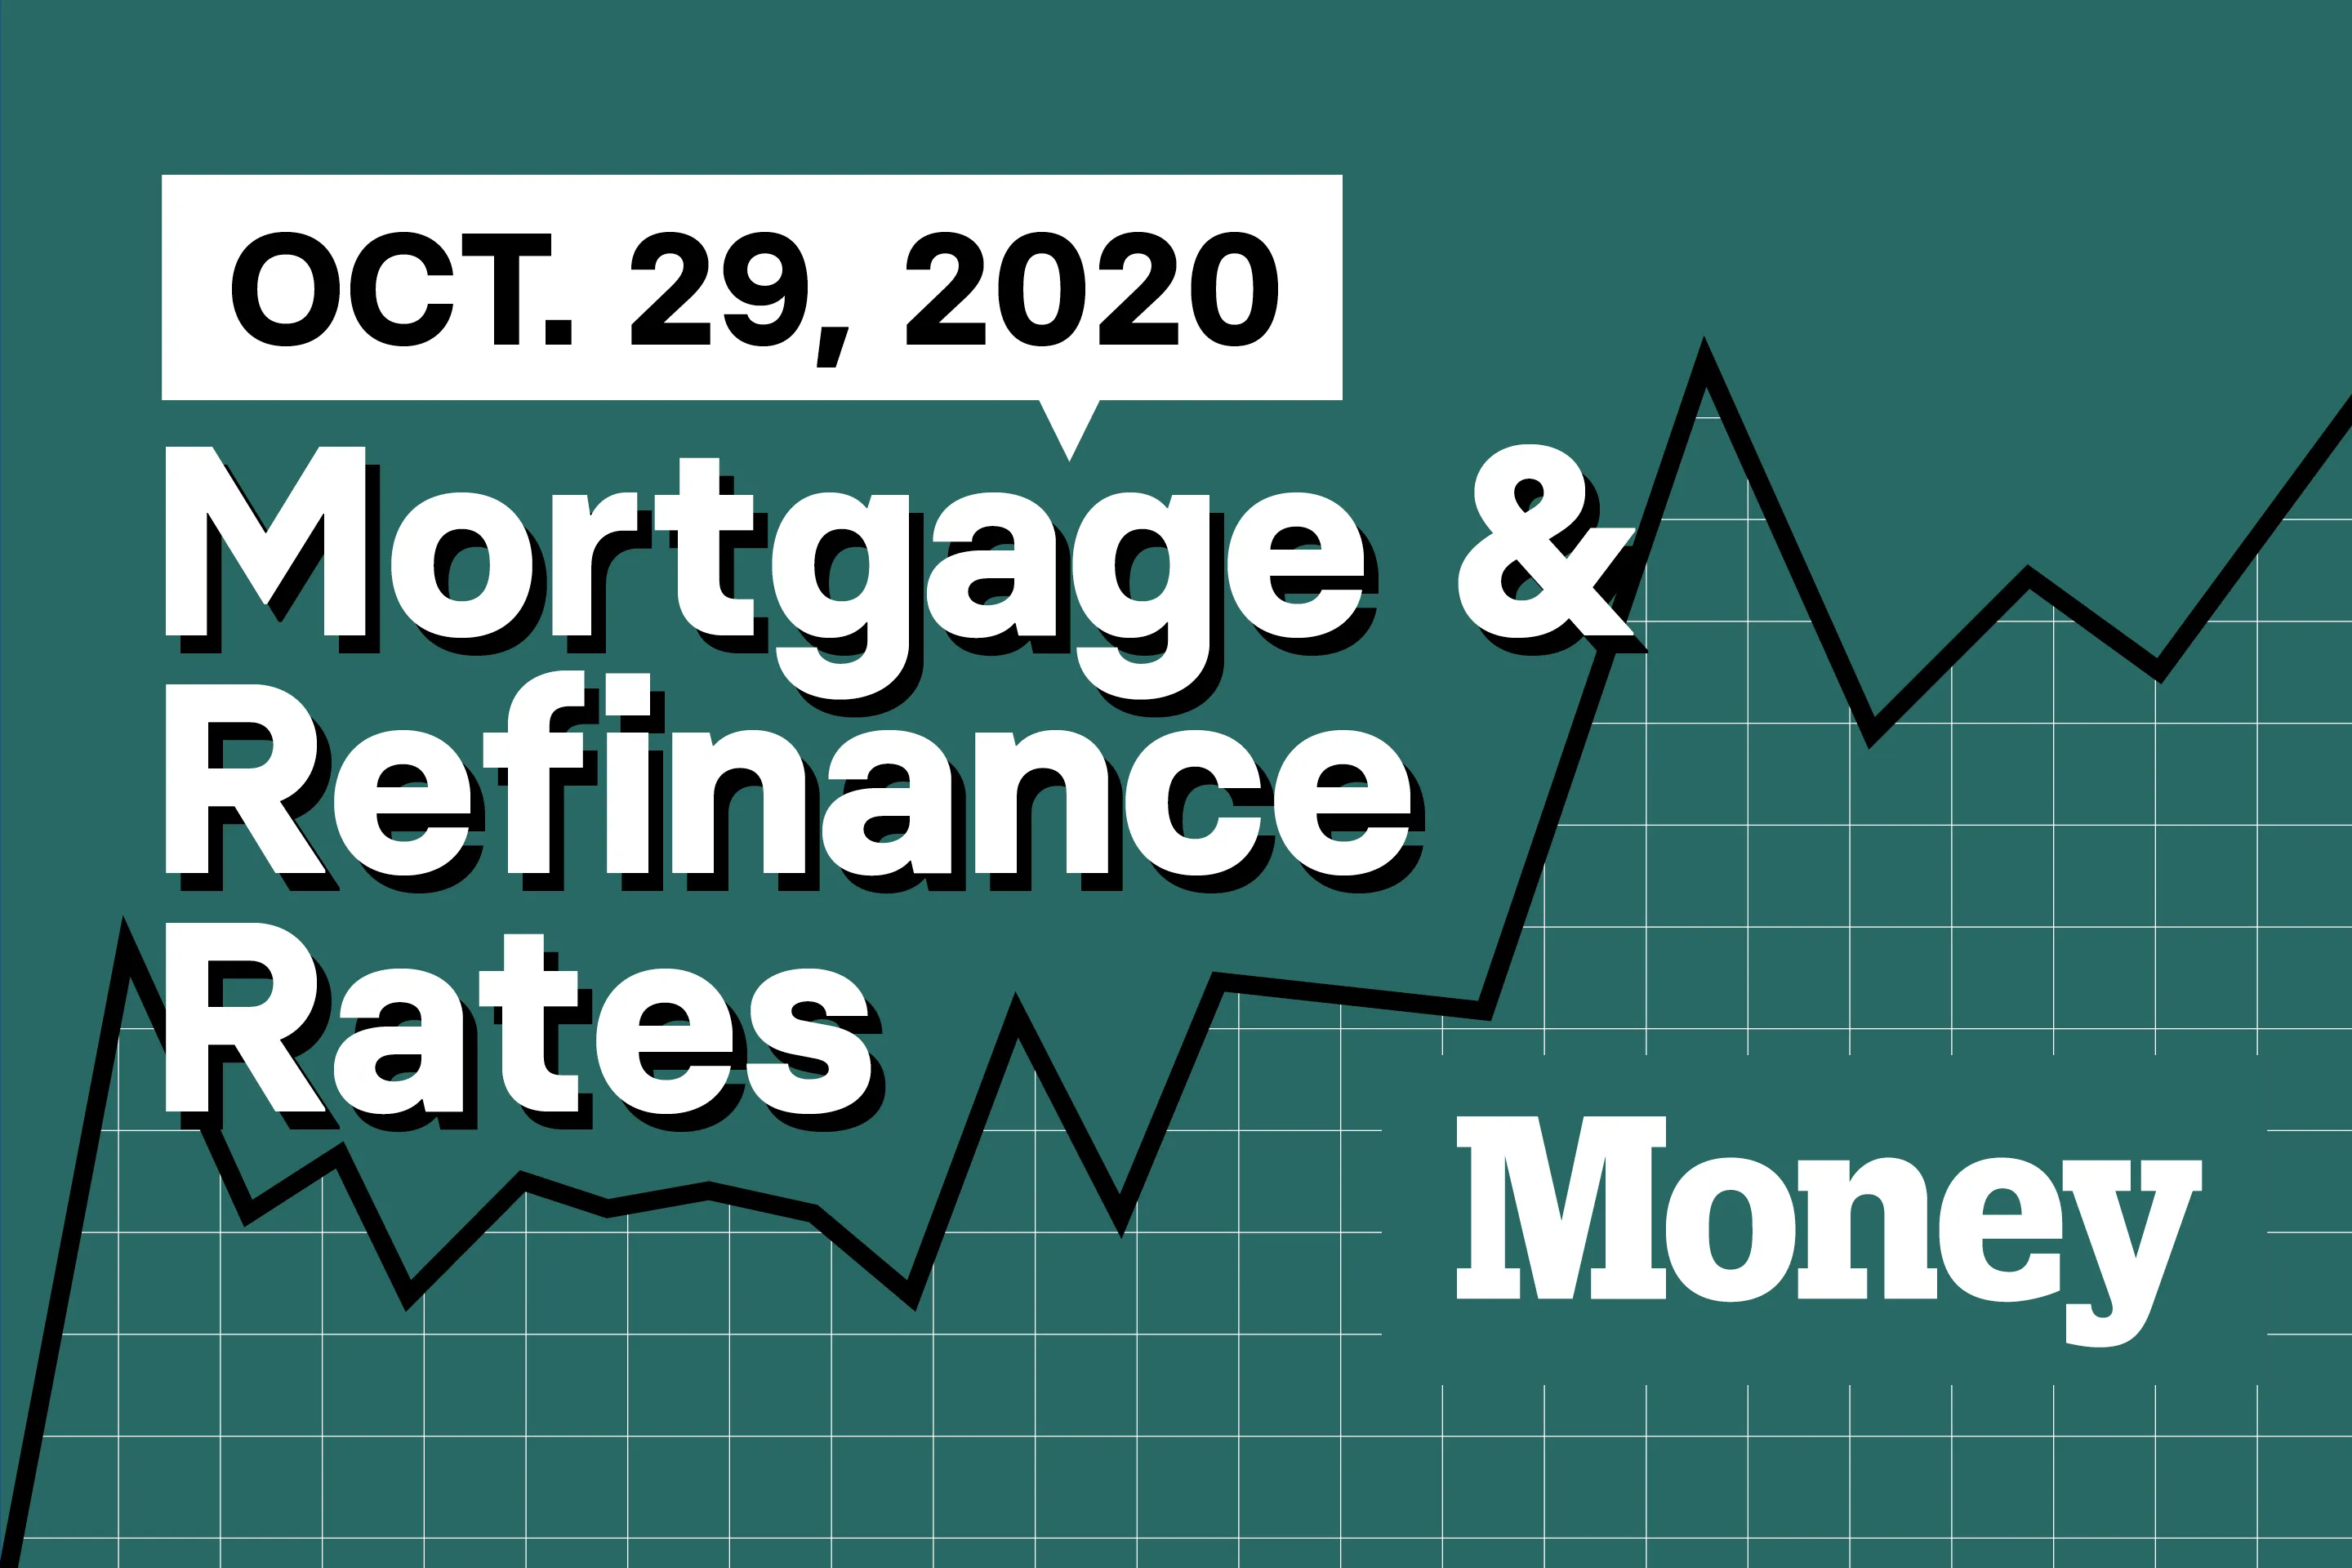 Here Are Today's Best Mortgage & Refinance Rates for October 29, 2020